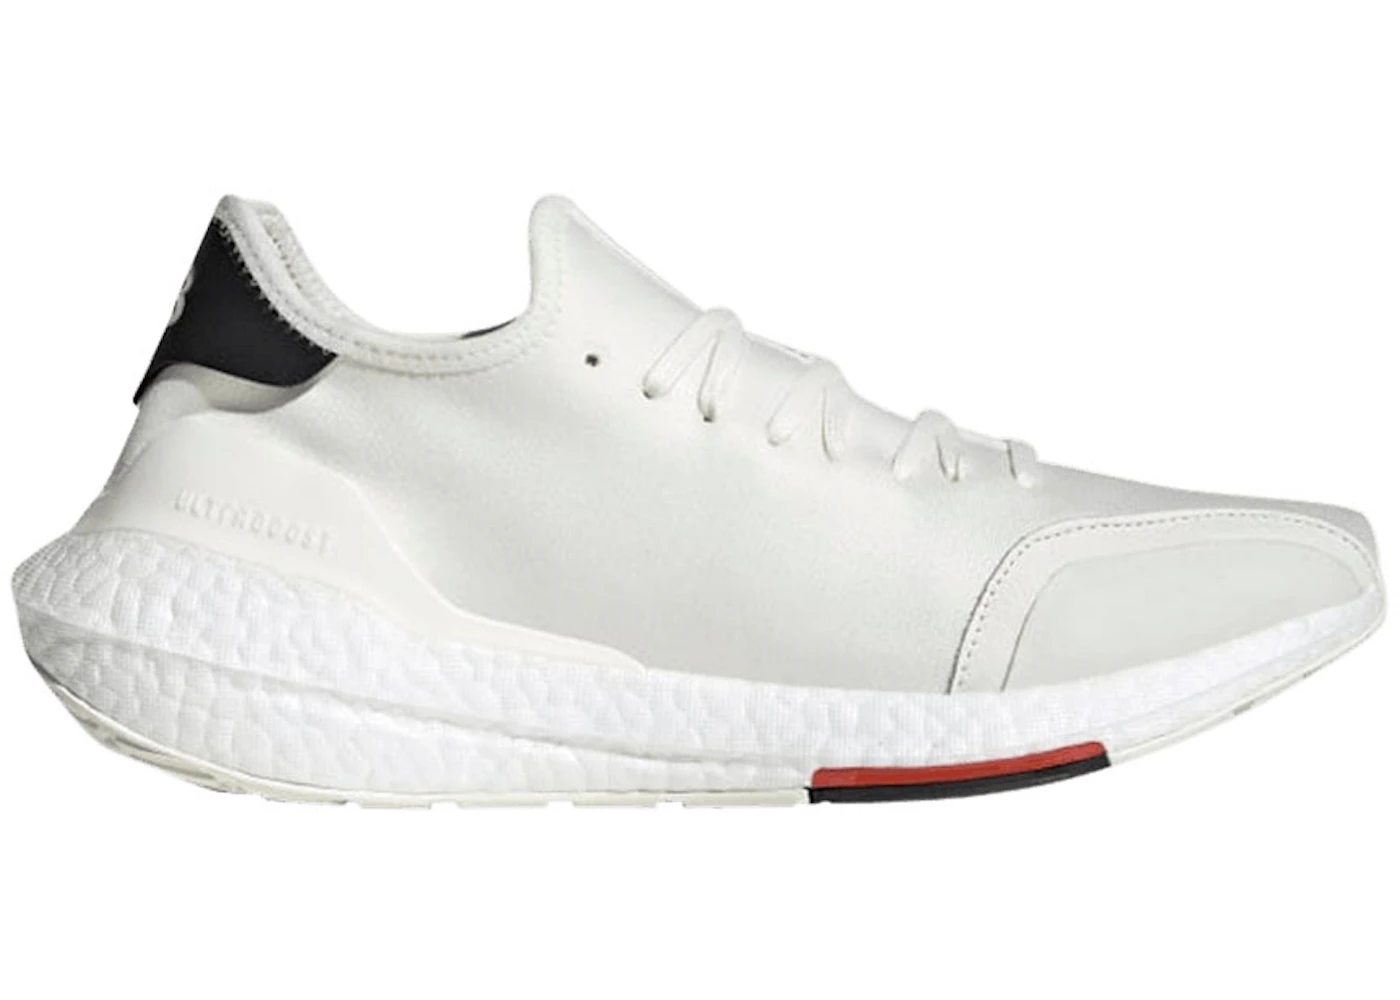 Foundation adjacent Rose color adidas Y-3 Ultra Boost 21 Core White - H67477 - US